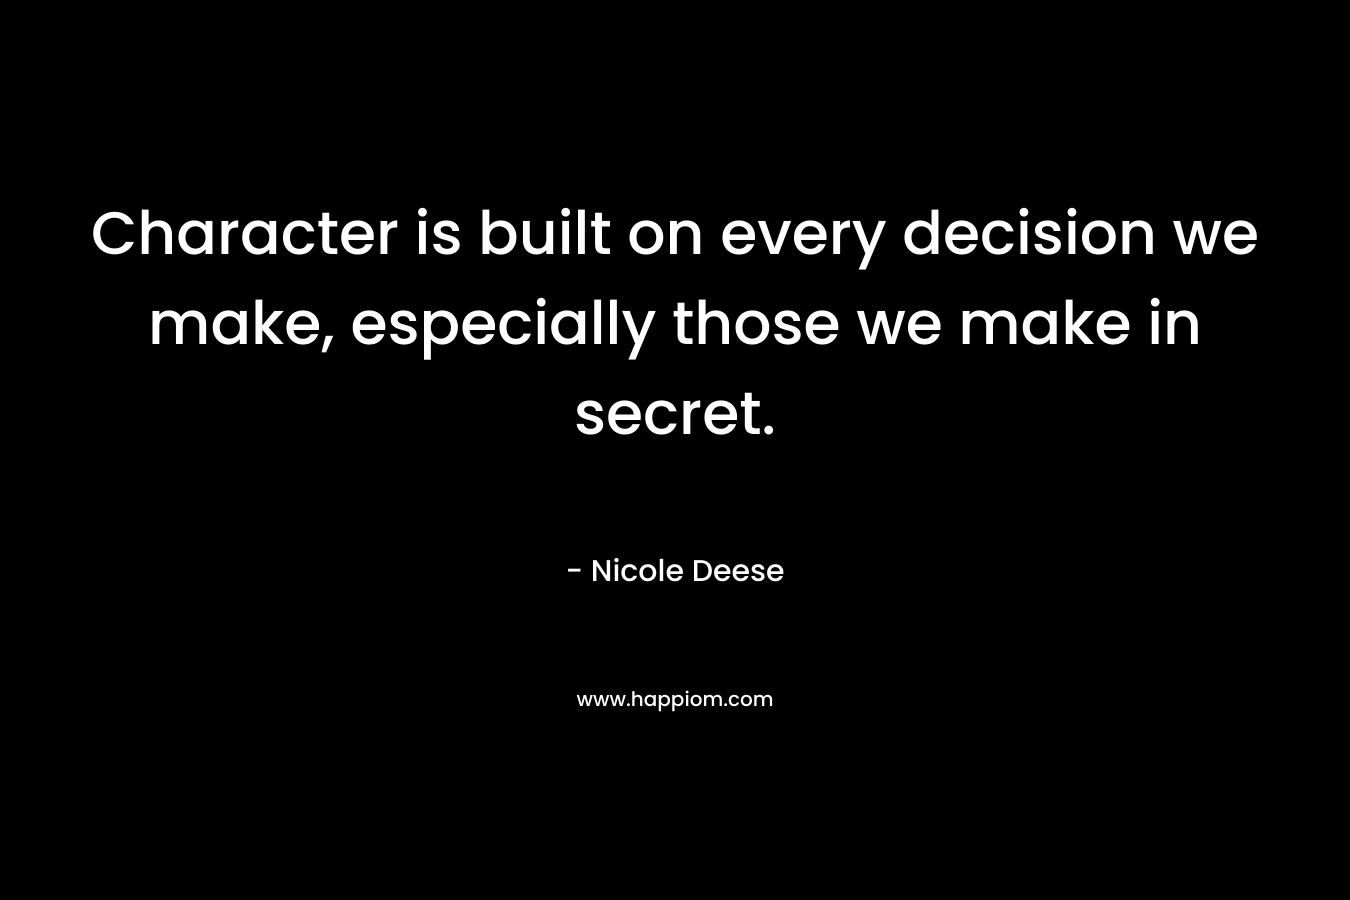 Character is built on every decision we make, especially those we make in secret. – Nicole Deese